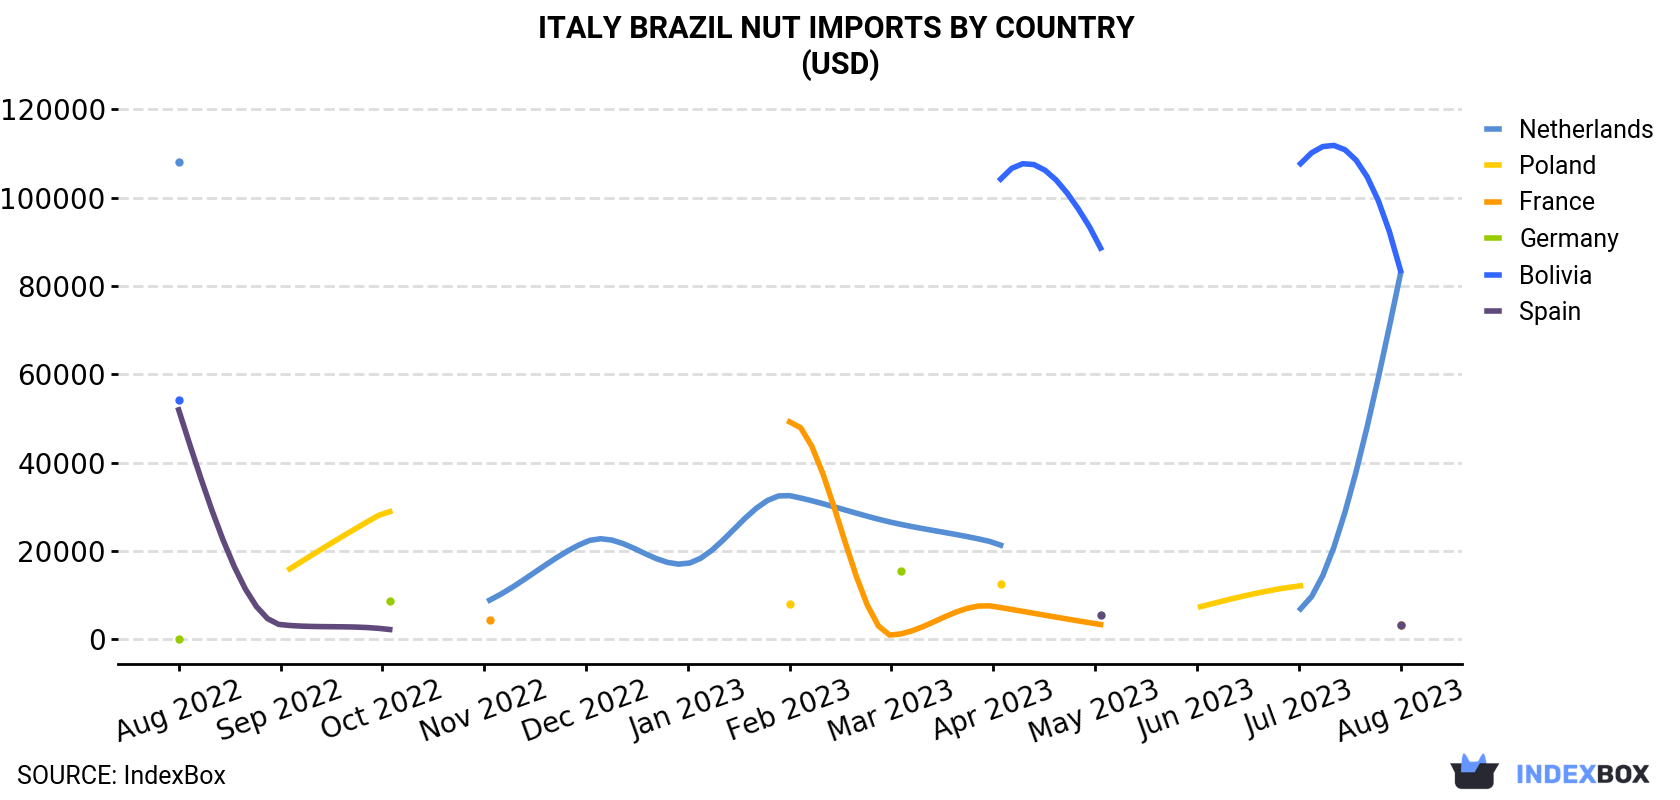 Italy Brazil Nut Imports By Country (USD)